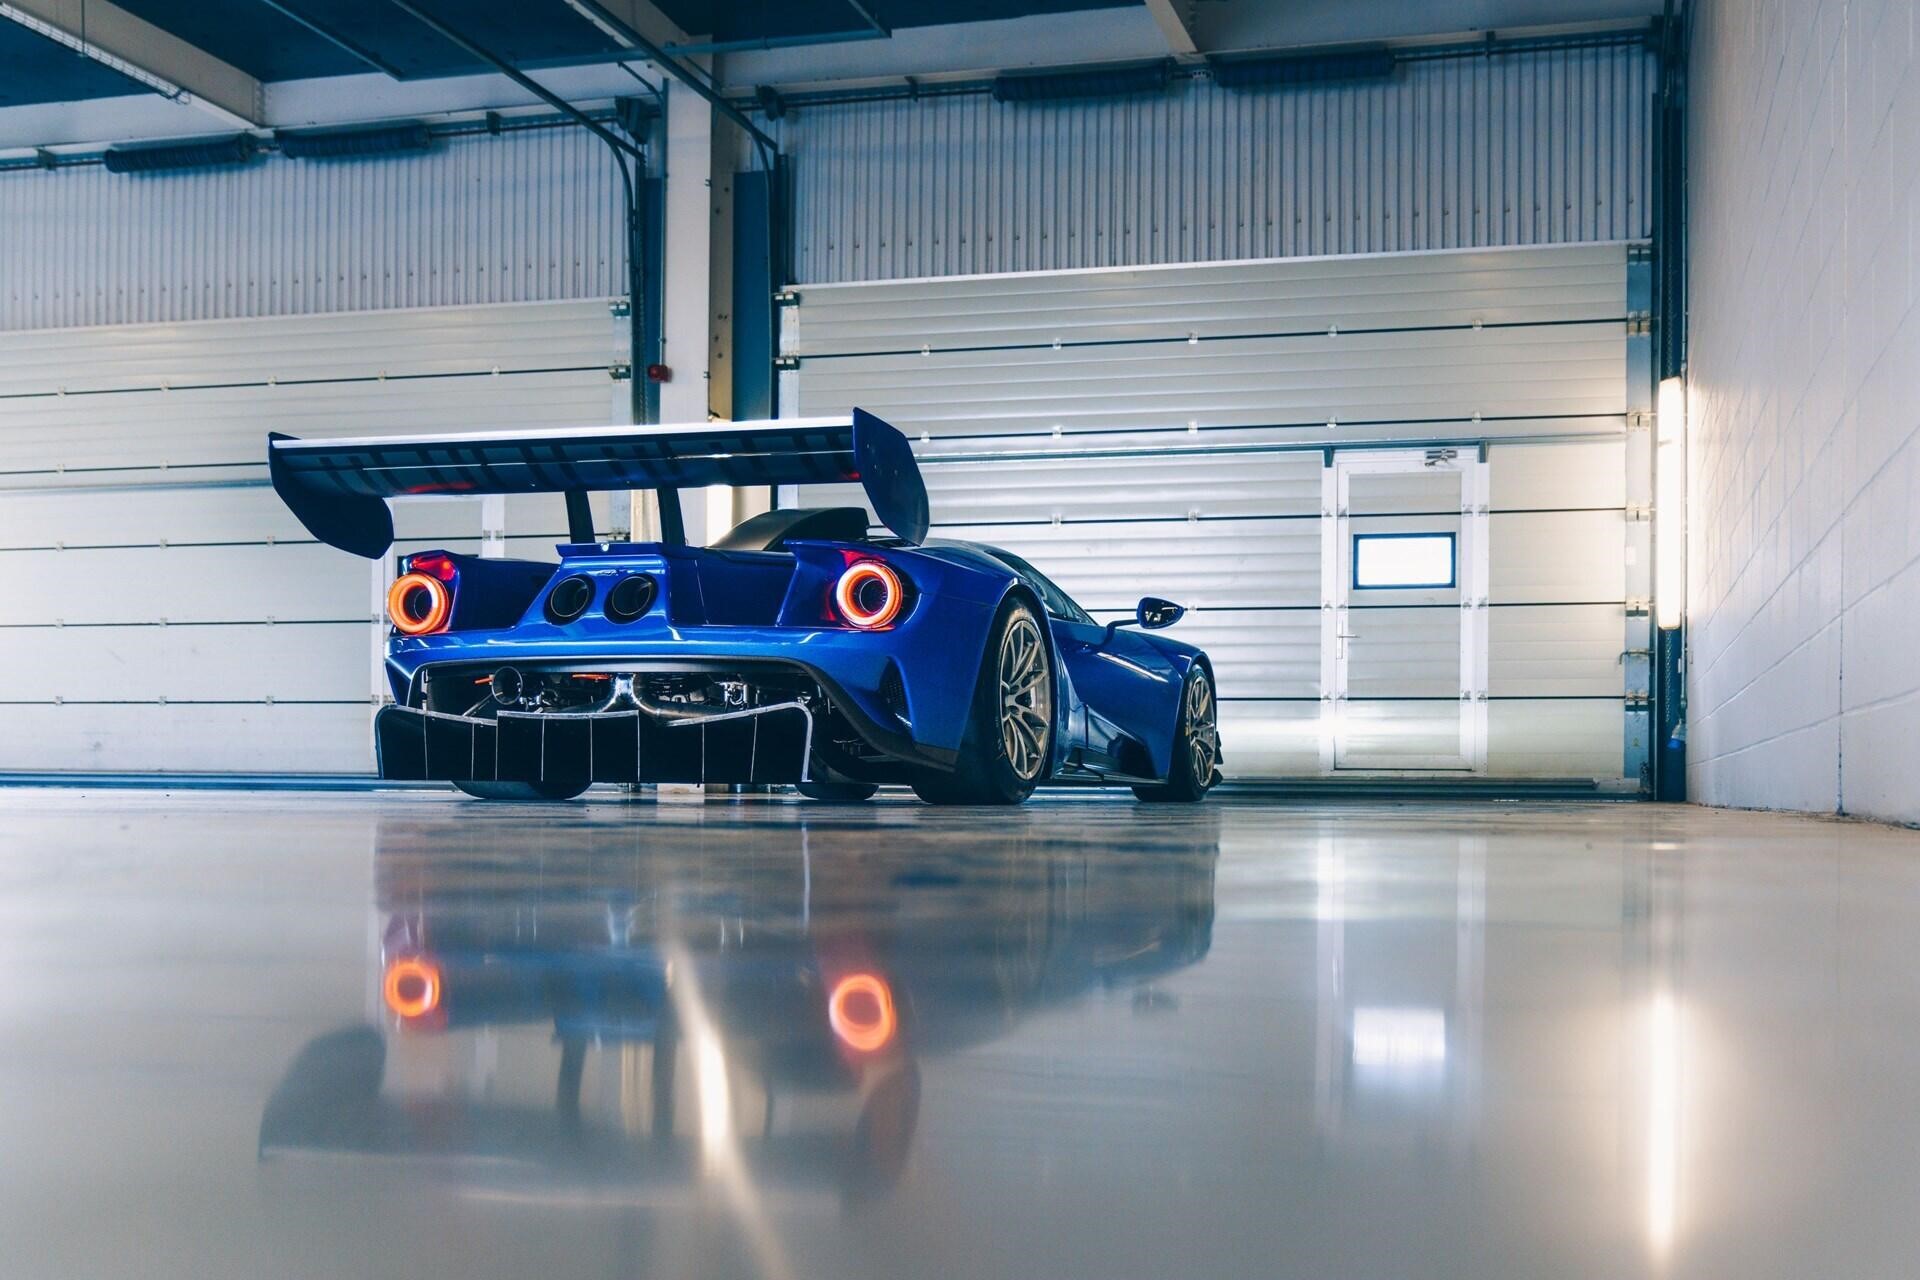 Rear-angled view of a blue 2020 Ford GT MK II track-only supercar